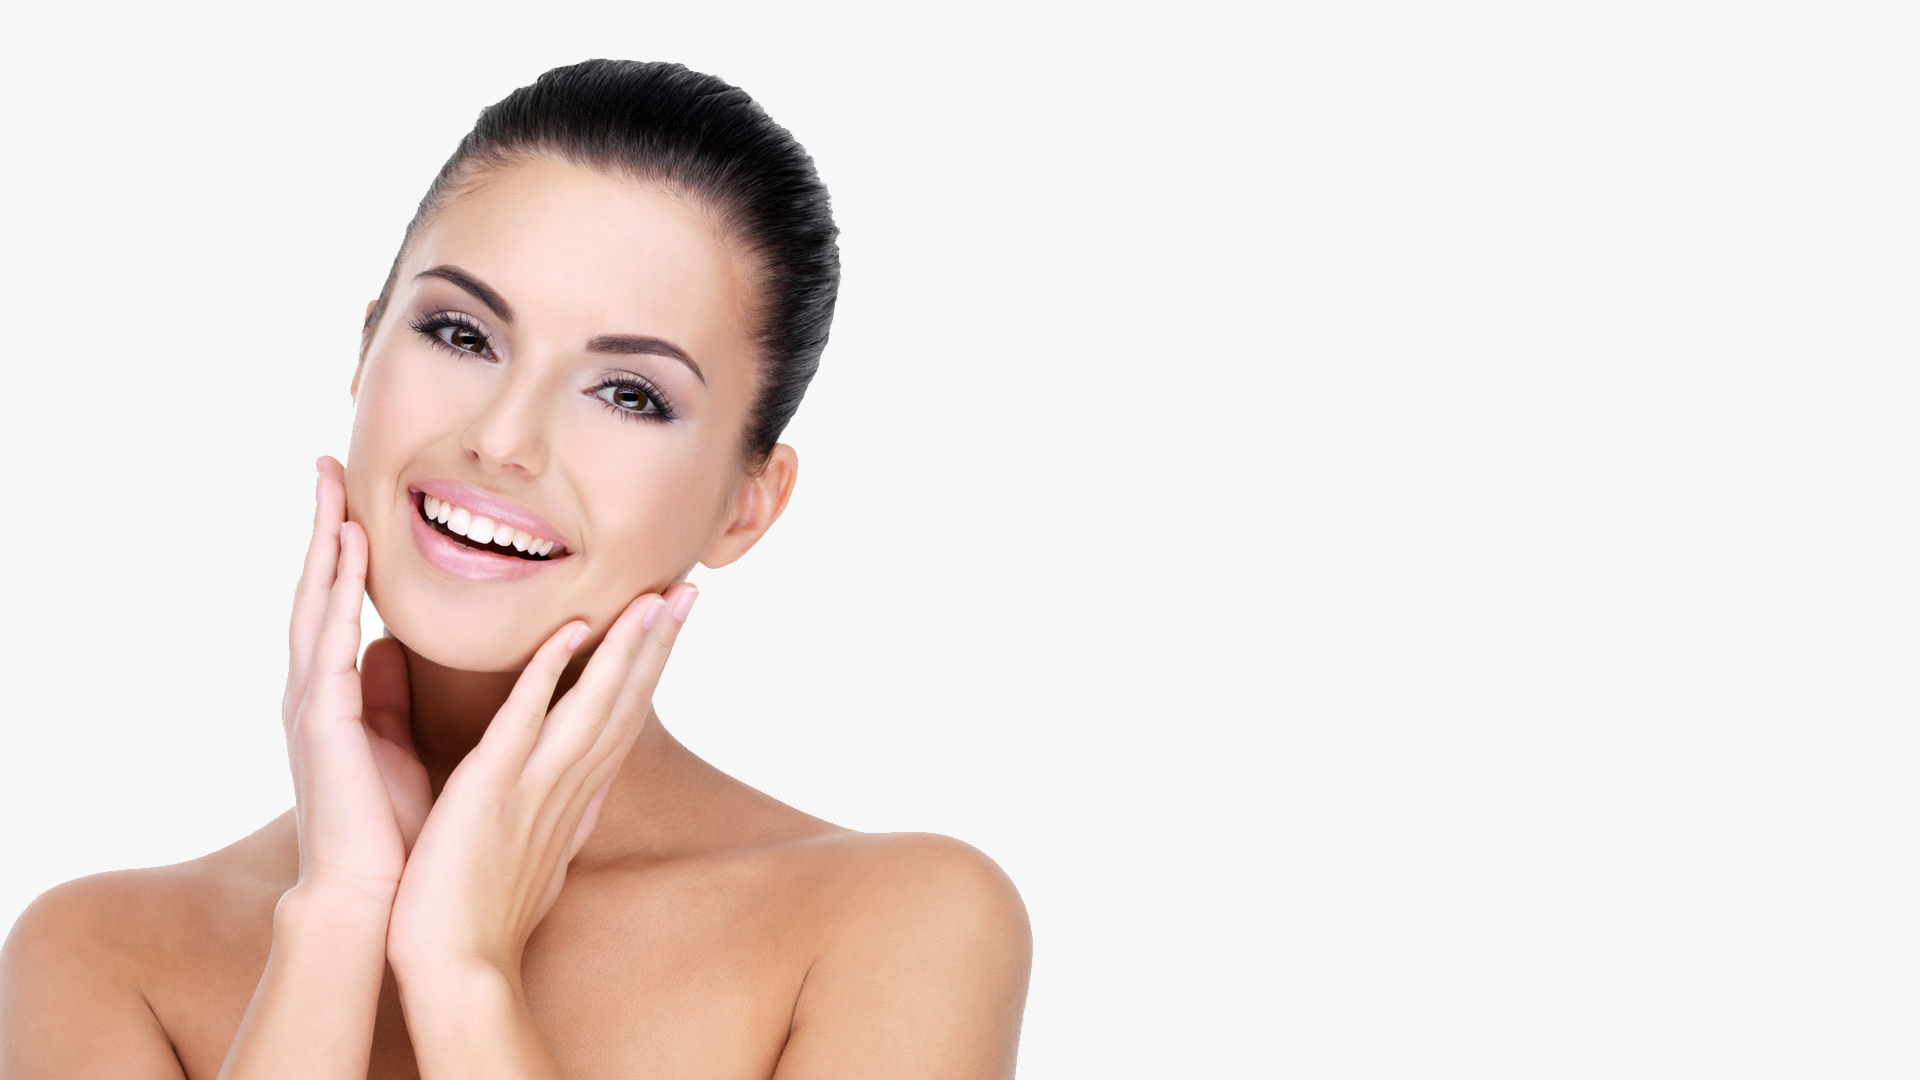 microneedling vivace experts